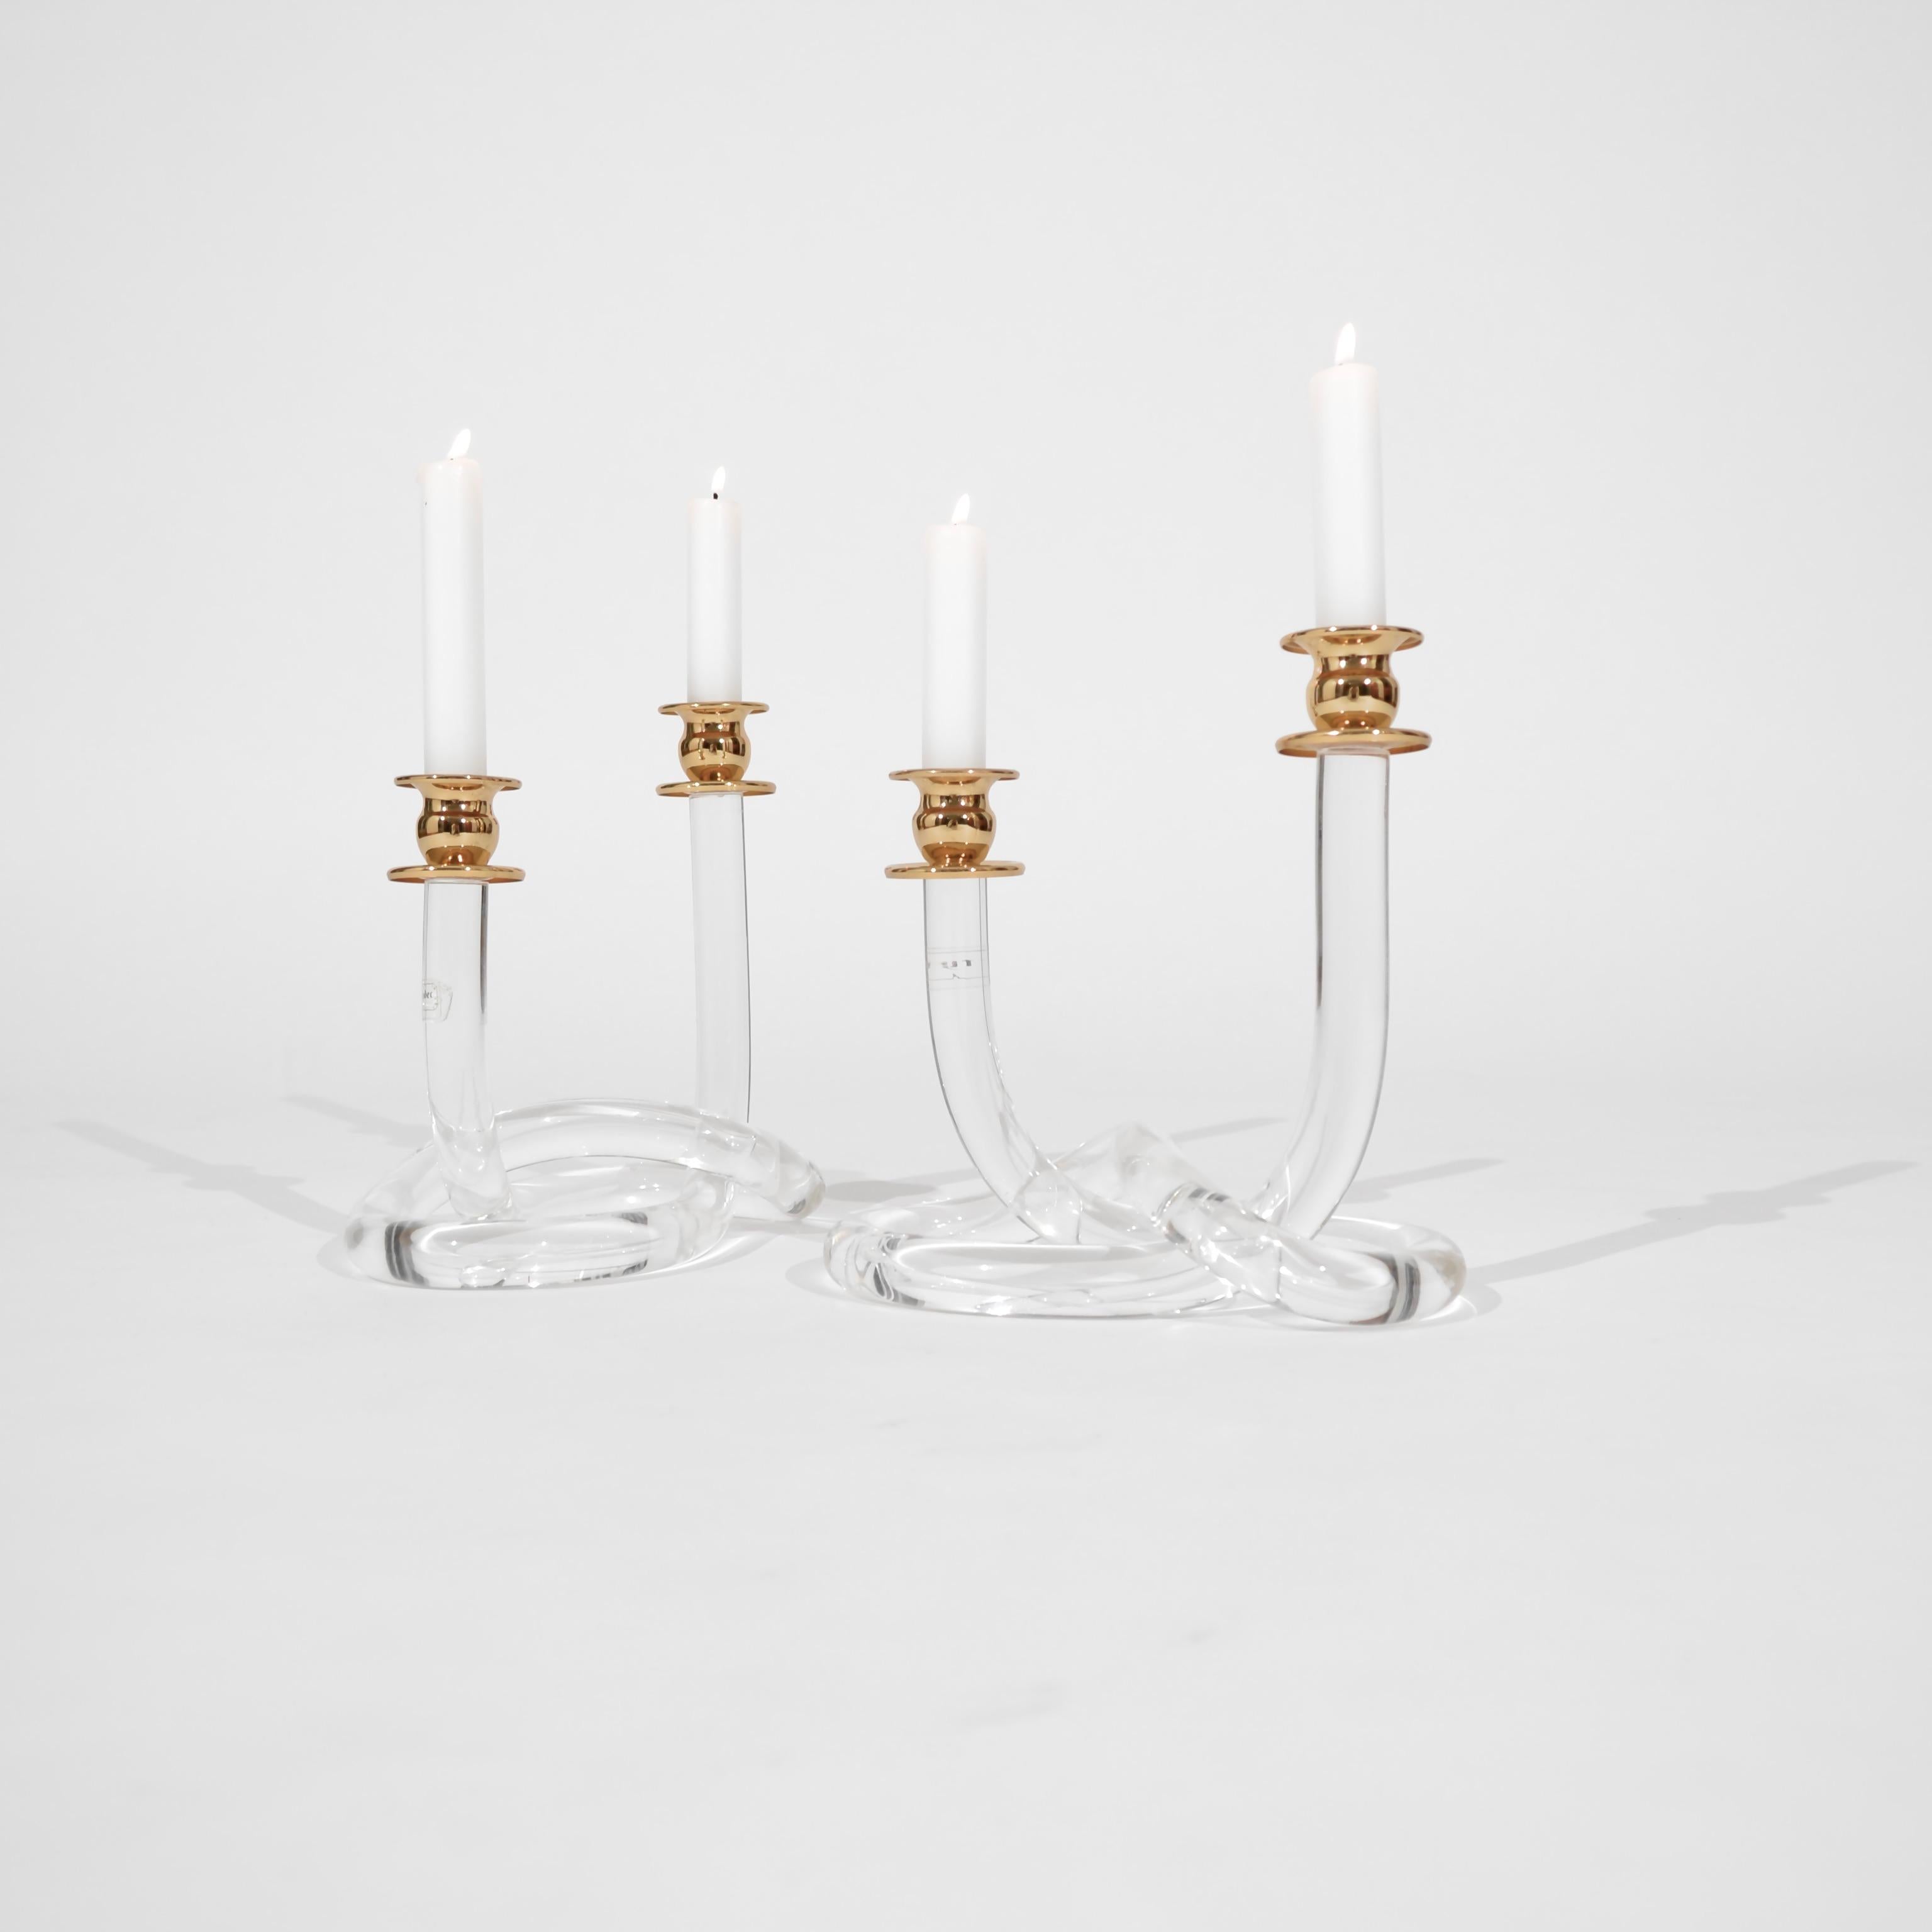 Recalling the work of Dorothy Thorpe, this pair of transparent candlesticks will be placed at your table to accompany your guests around a candlelit meal with a seventies taste.